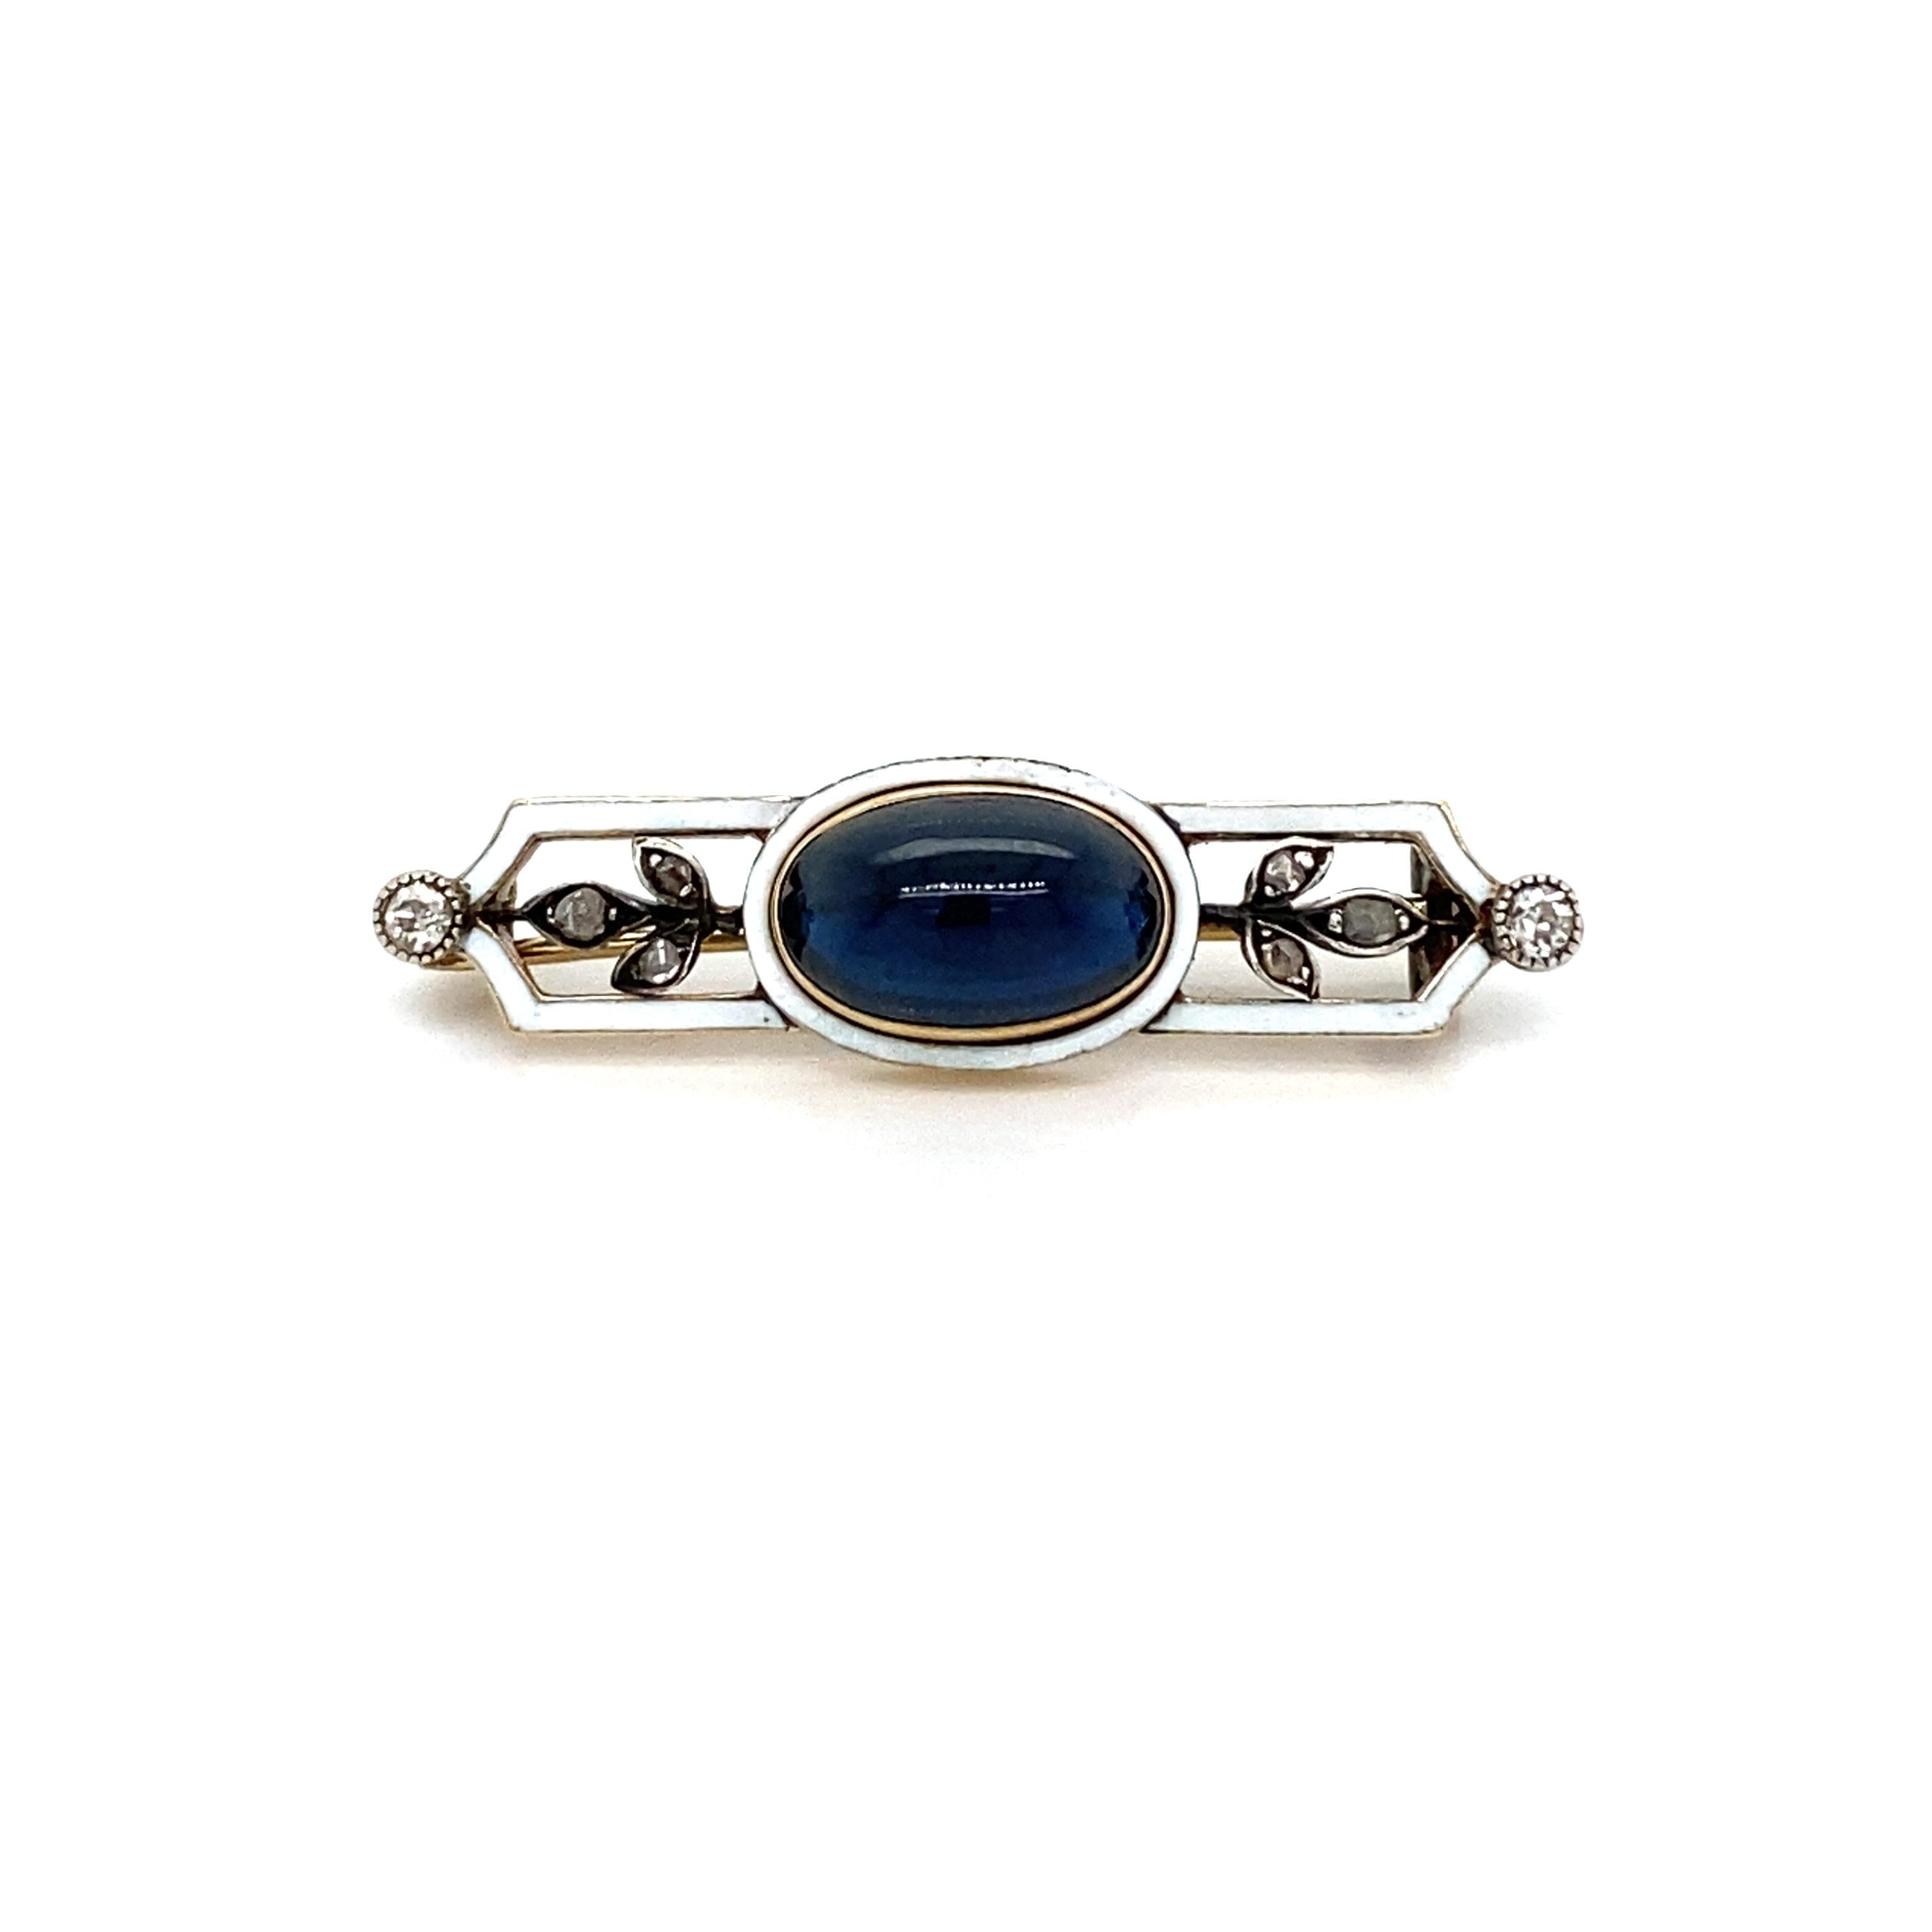 Authentic unusual Art Nouveau Brooch is crafted in 18K rose gold and is adorned with one Large Oval Shape Natural Burma Cabochon Sapphire, 1.50 carats, and adorned of Sparkling Old mine cut diamonds and white enamel with a floral design.
Circa